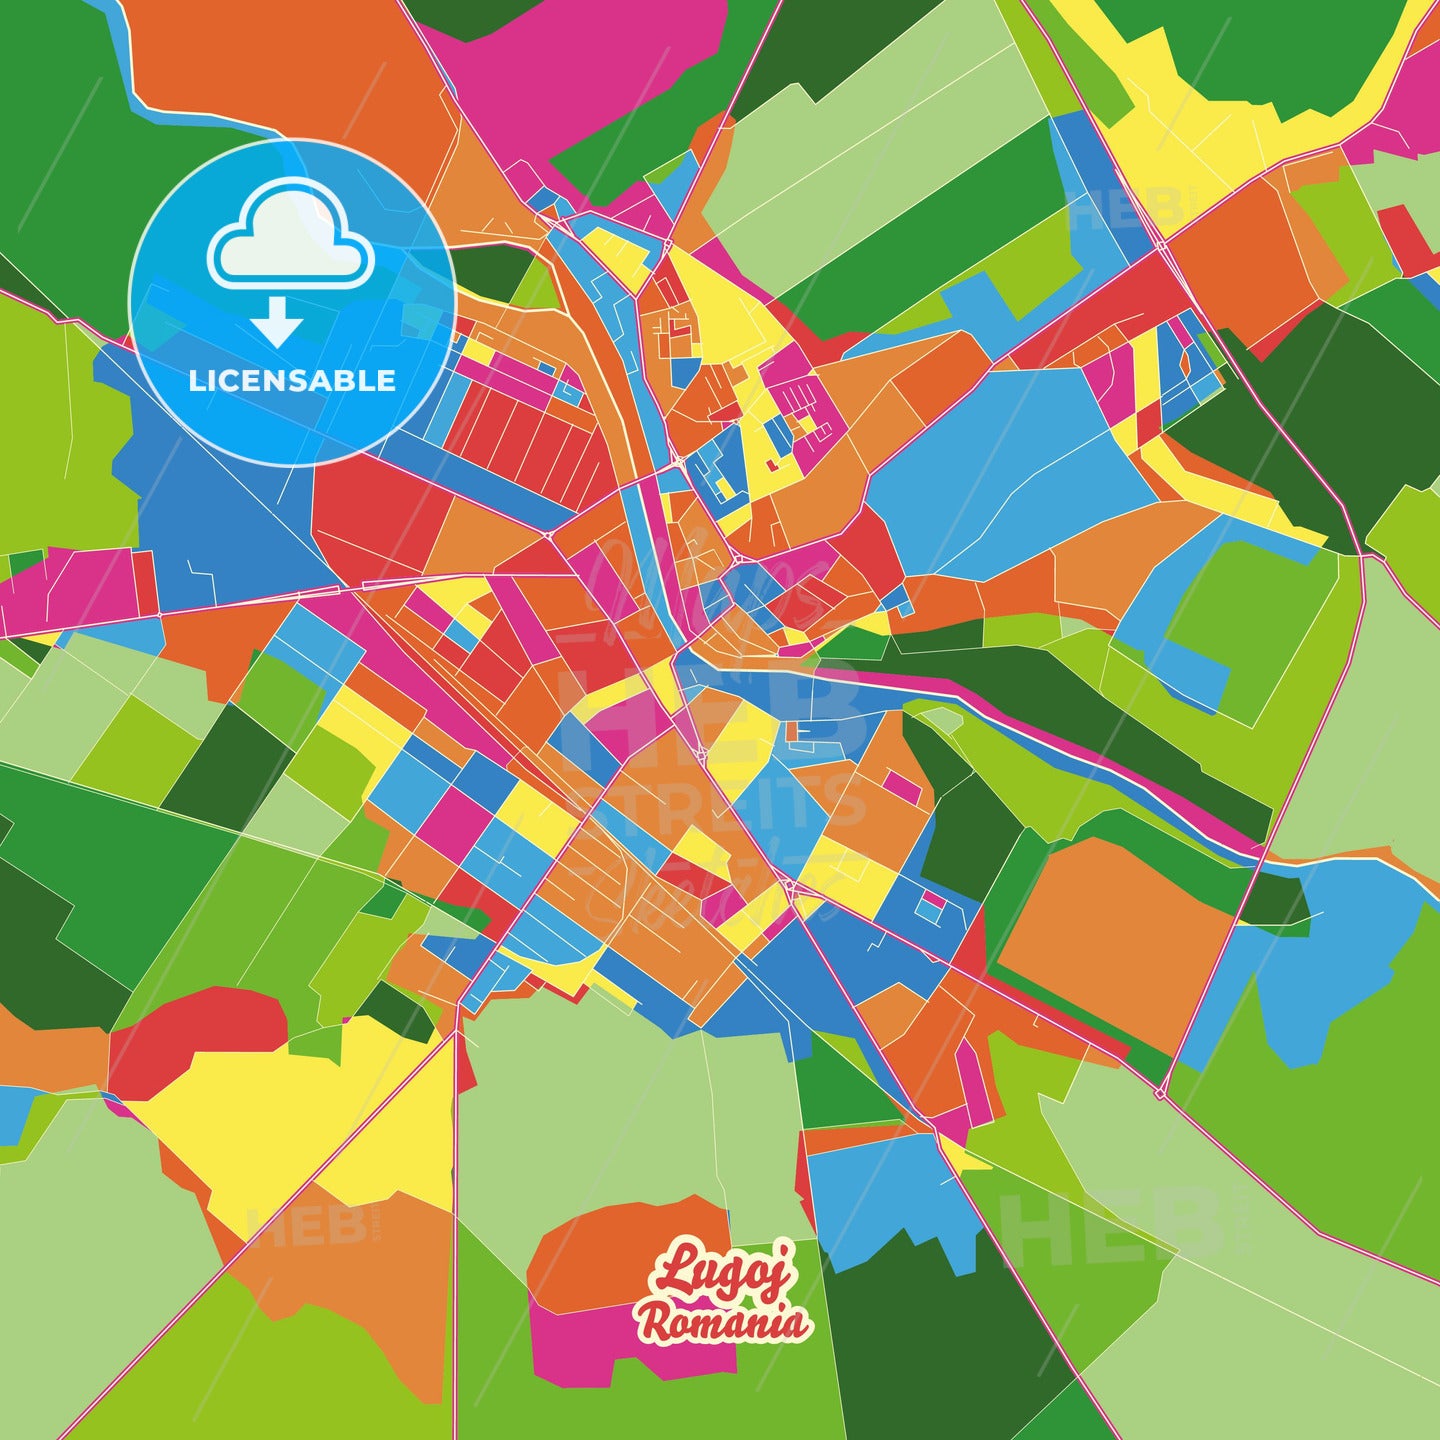 Lugoj, Romania Crazy Colorful Street Map Poster Template - HEBSTREITS Sketches